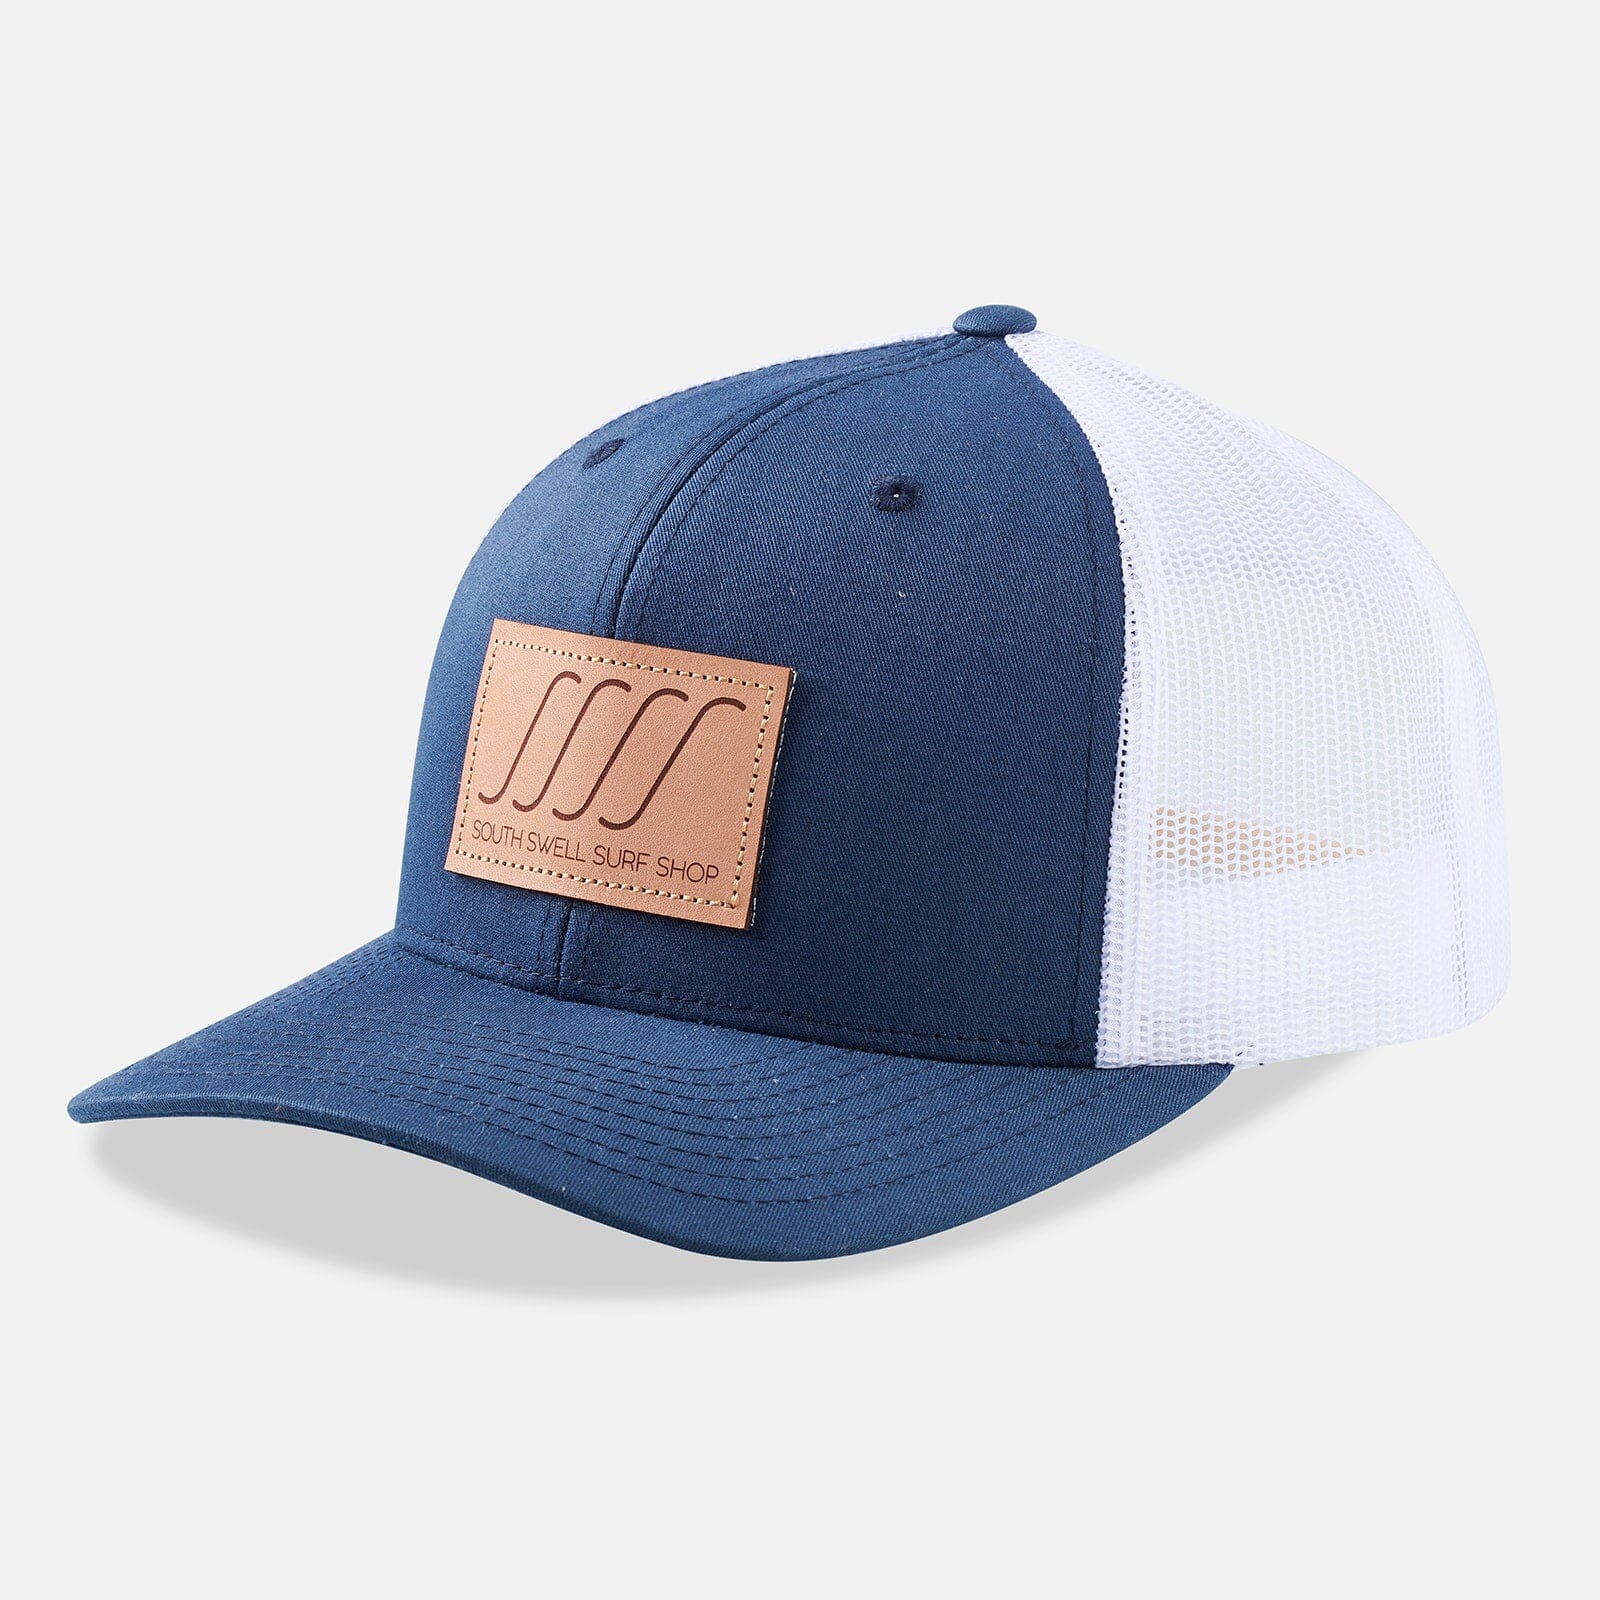 South Swell Leather Patch Trucker Hat Hats SOUTH SWELL Navy 